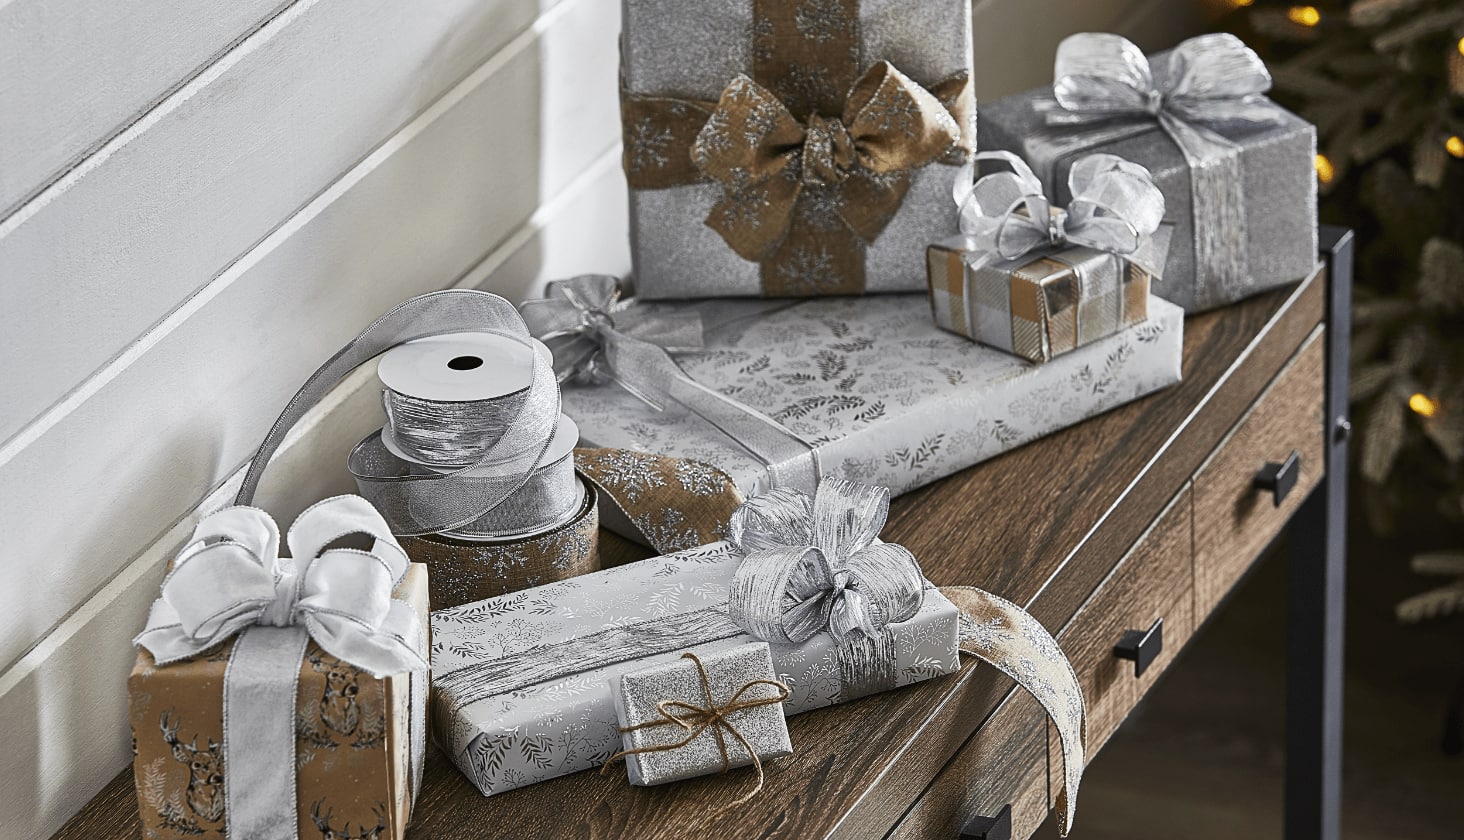 Presents wrapped in silver wrapping paper.